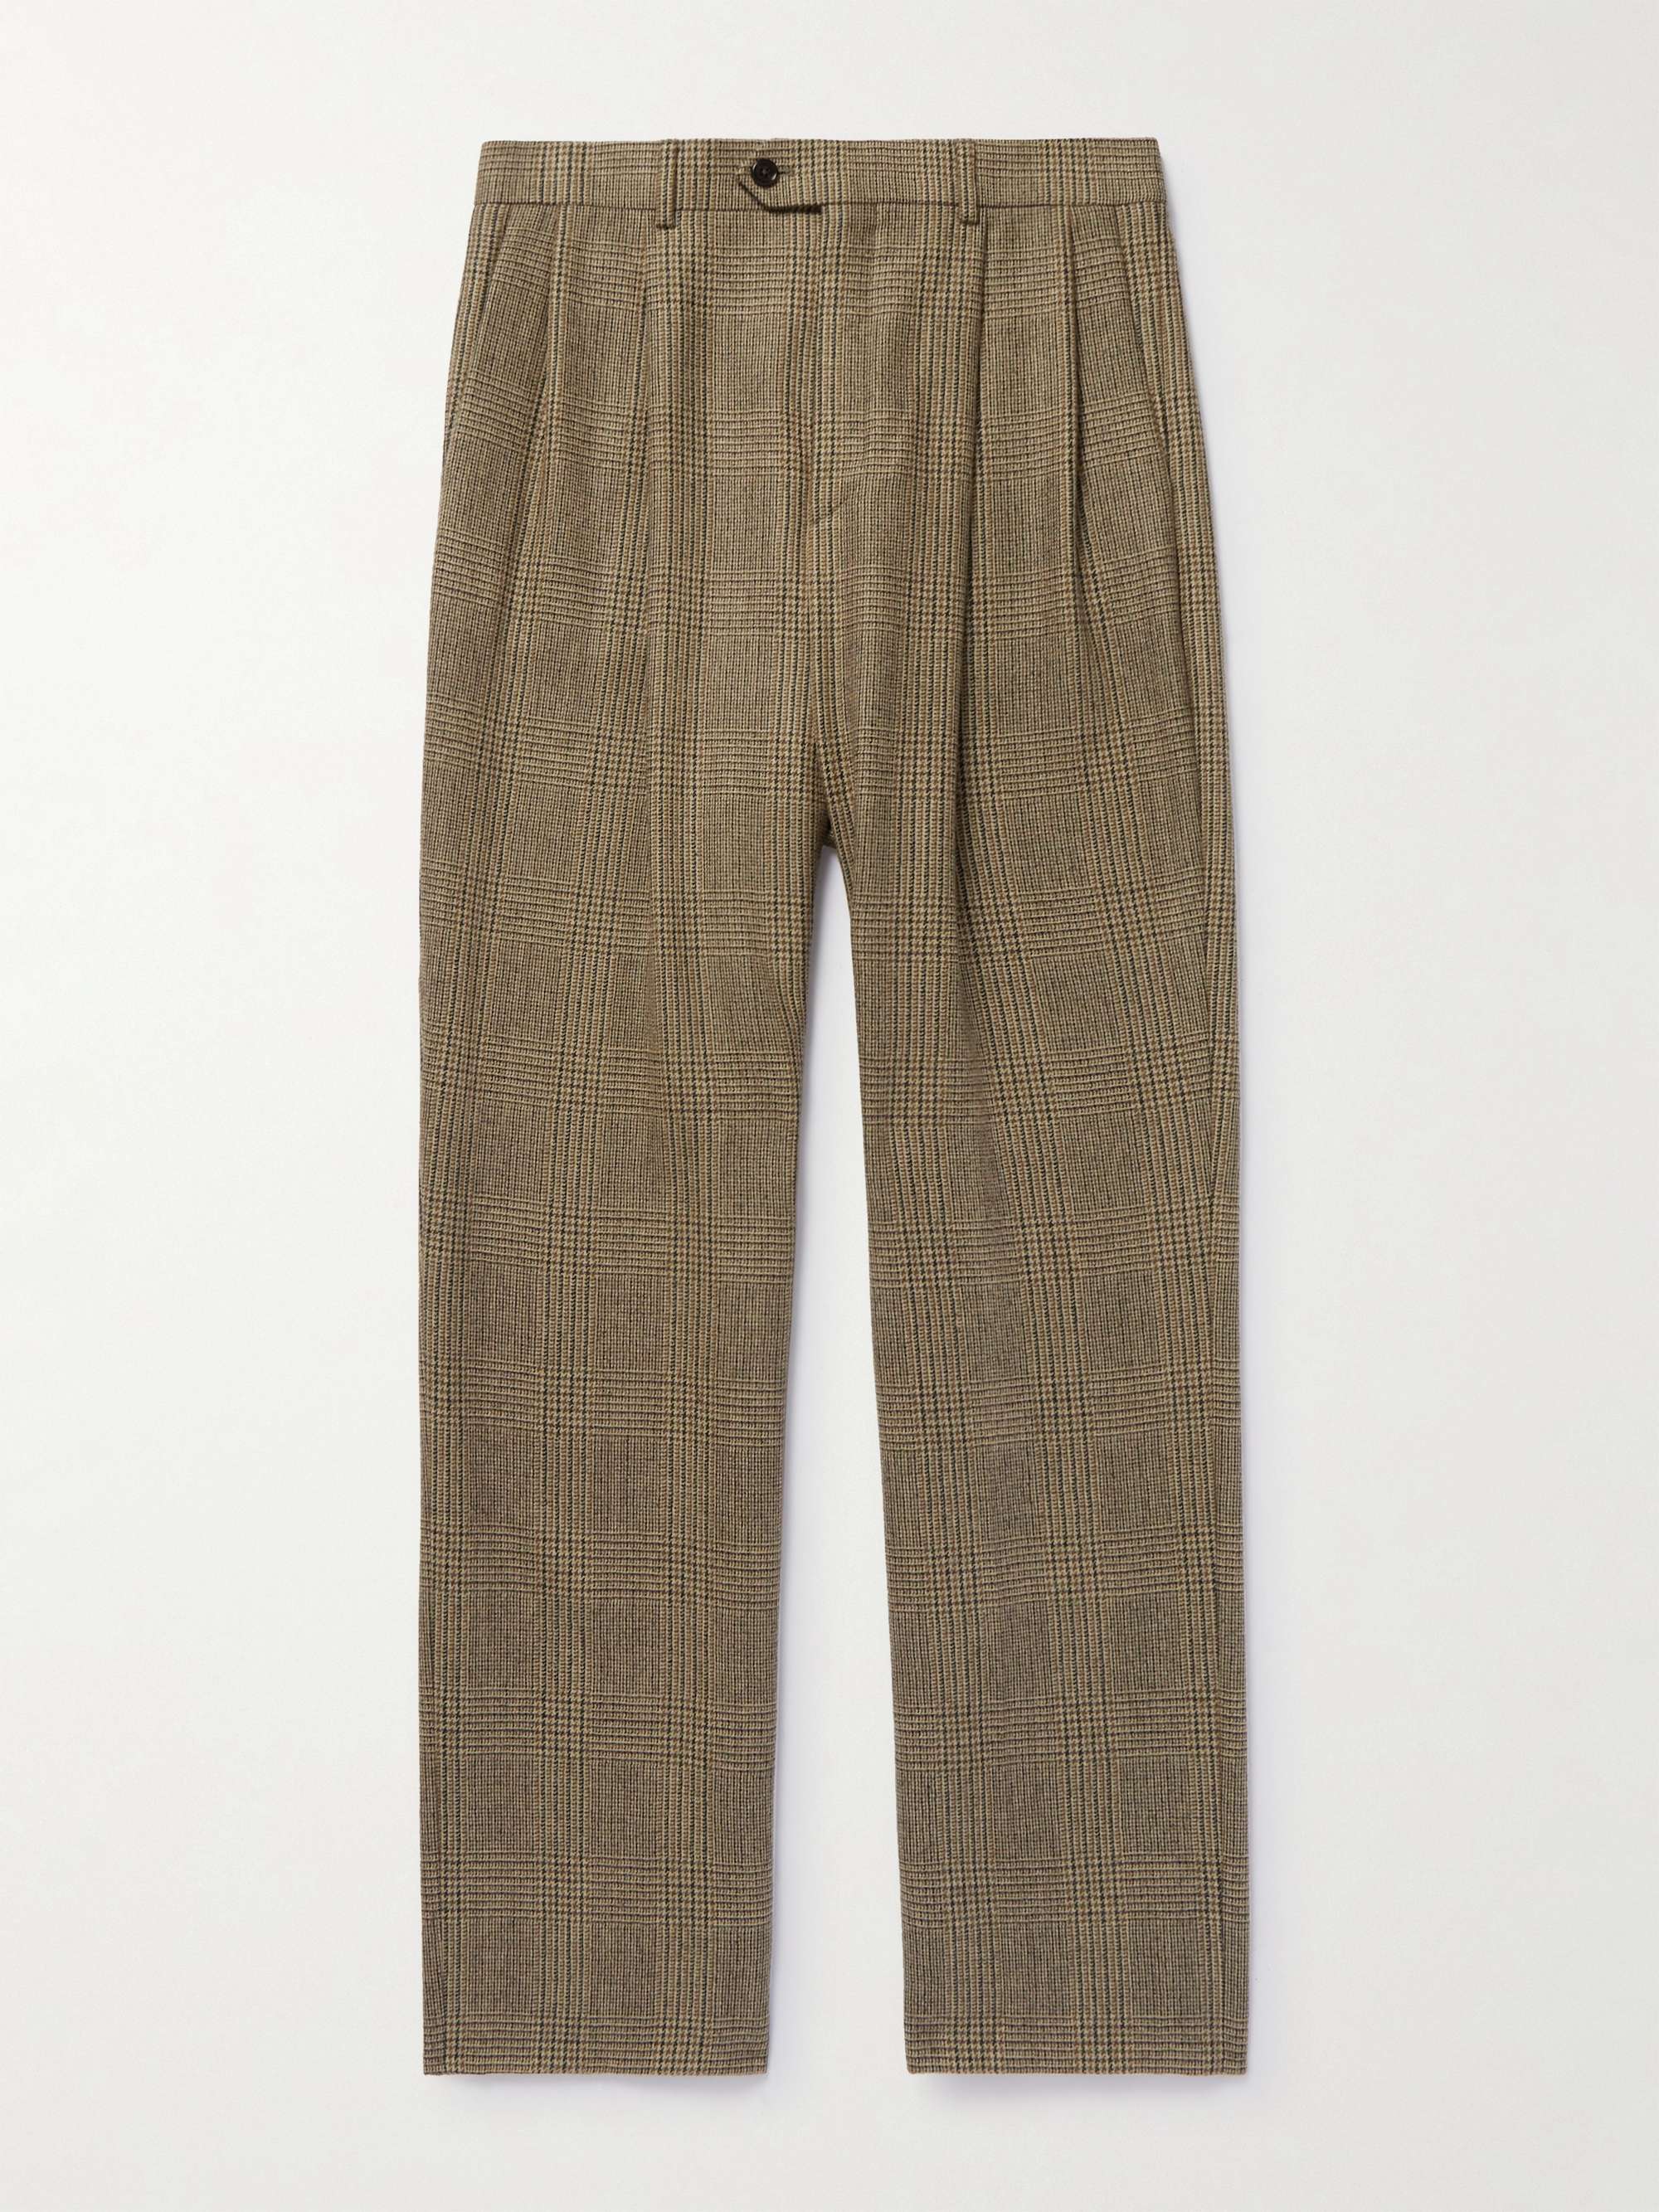 CELINE HOMME Wide-Leg Pleated Prince of Wales Checked Wool Trousers for Men